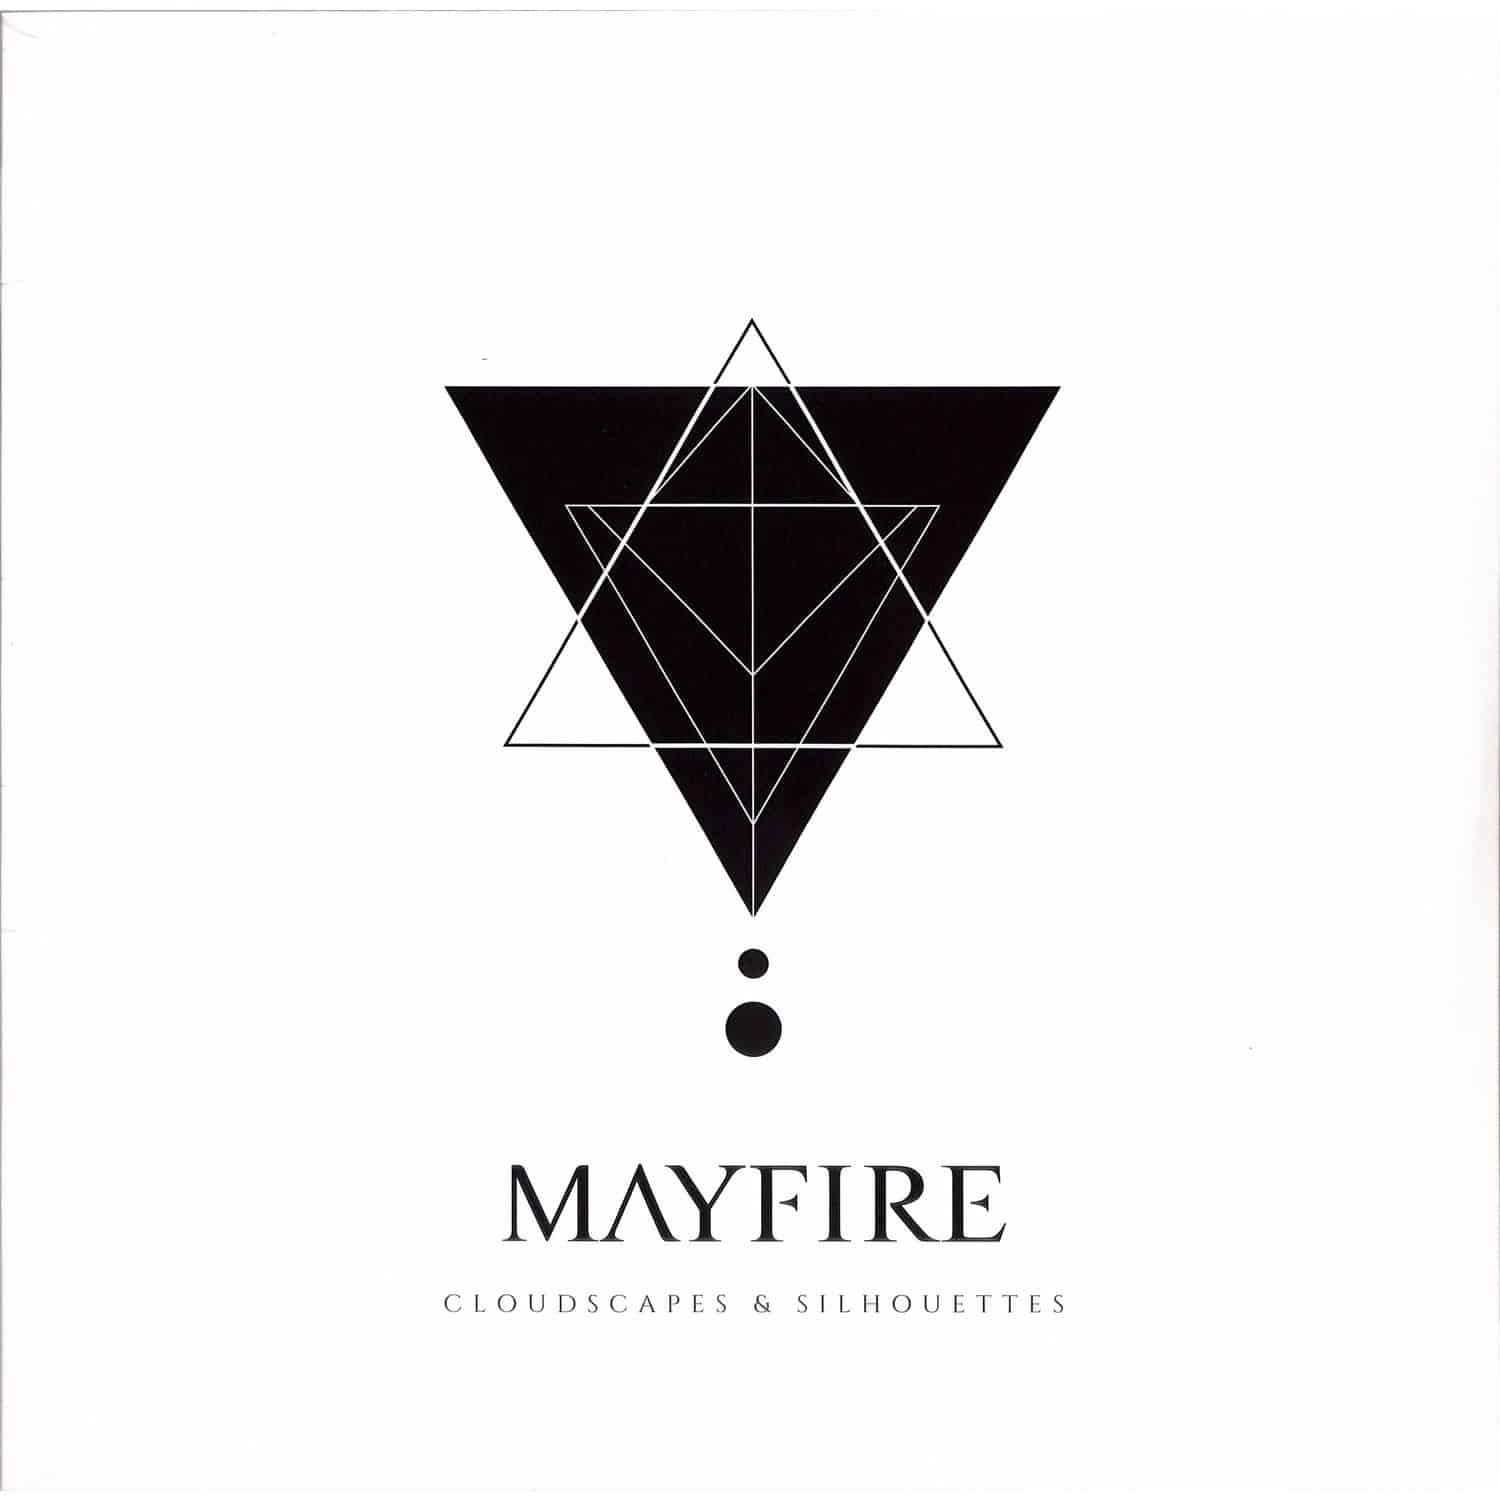 Mayfire - CLOUDSCAPES & SILHOUETTES 